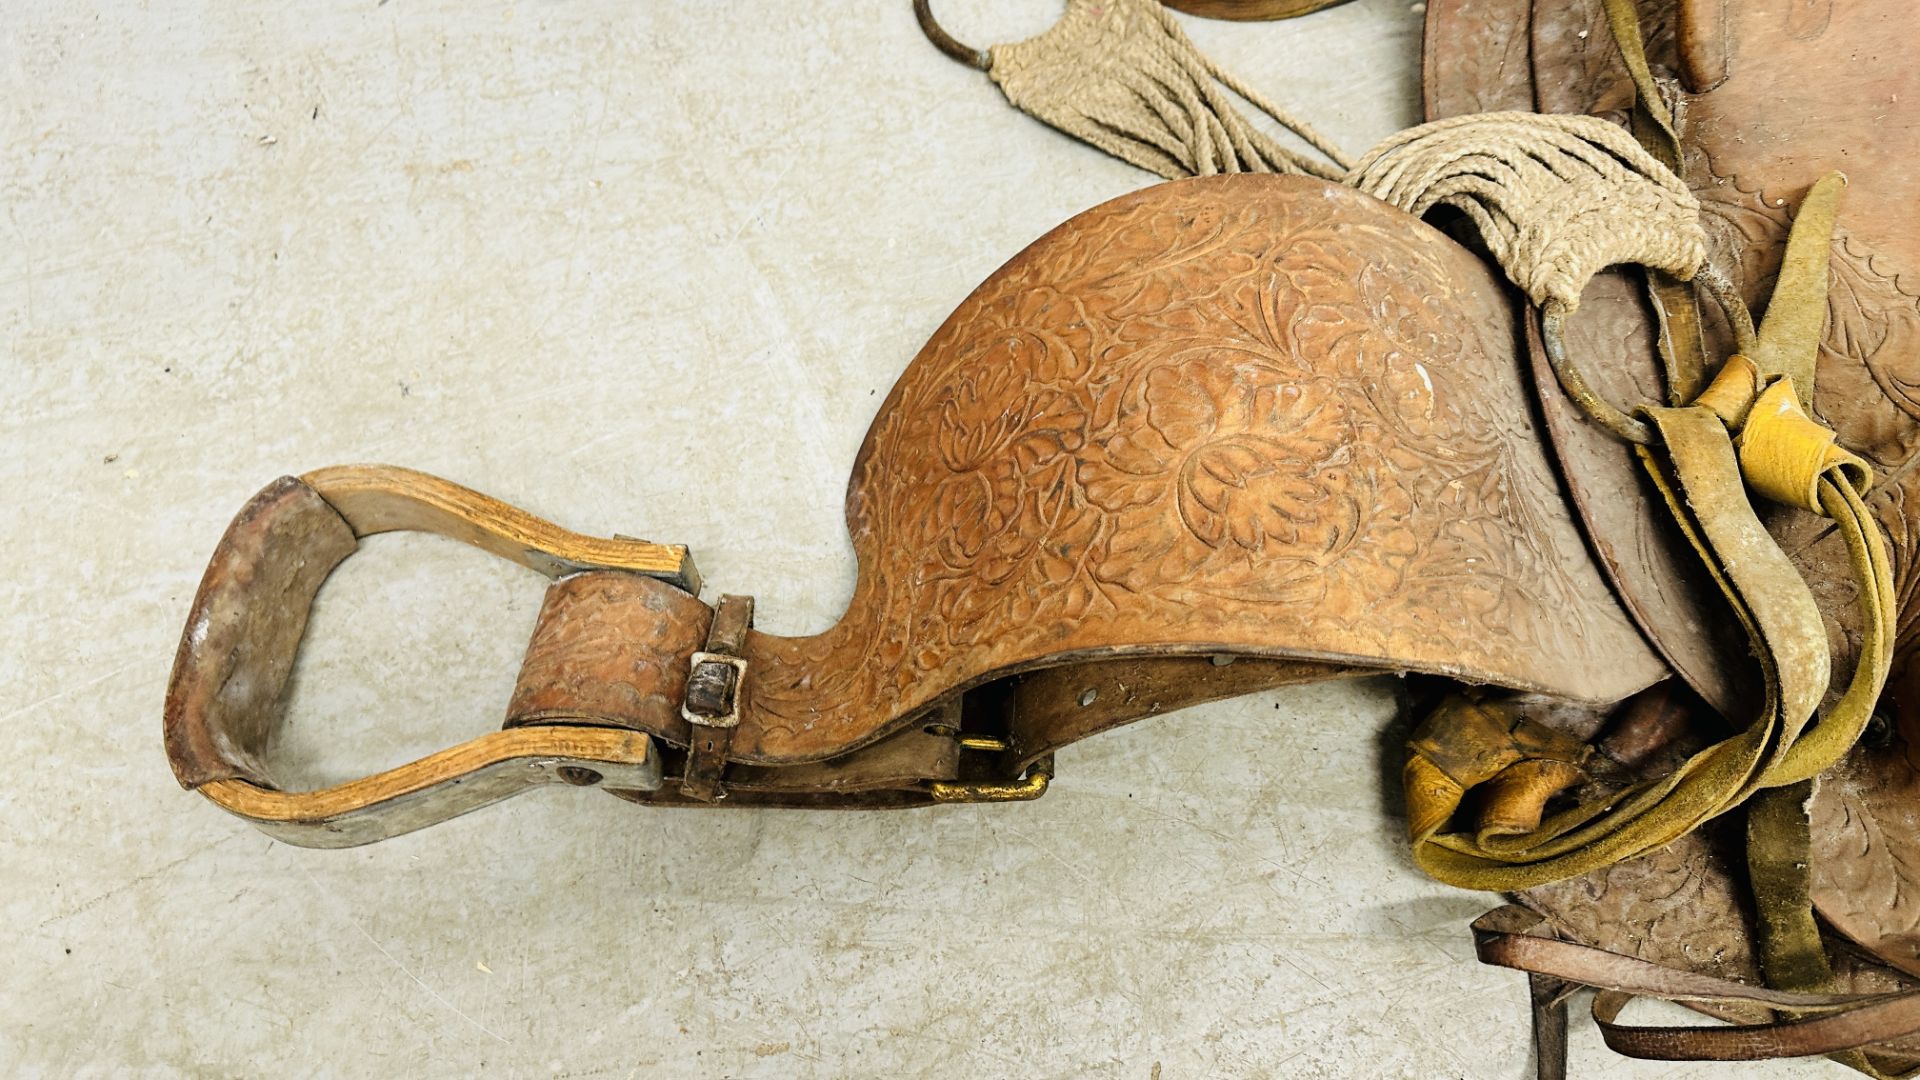 A VINTAGE WESTERN COWBOY SADDLE, THE TAN LEATHER WITH EMBOSSED DECORATION. - Image 4 of 11